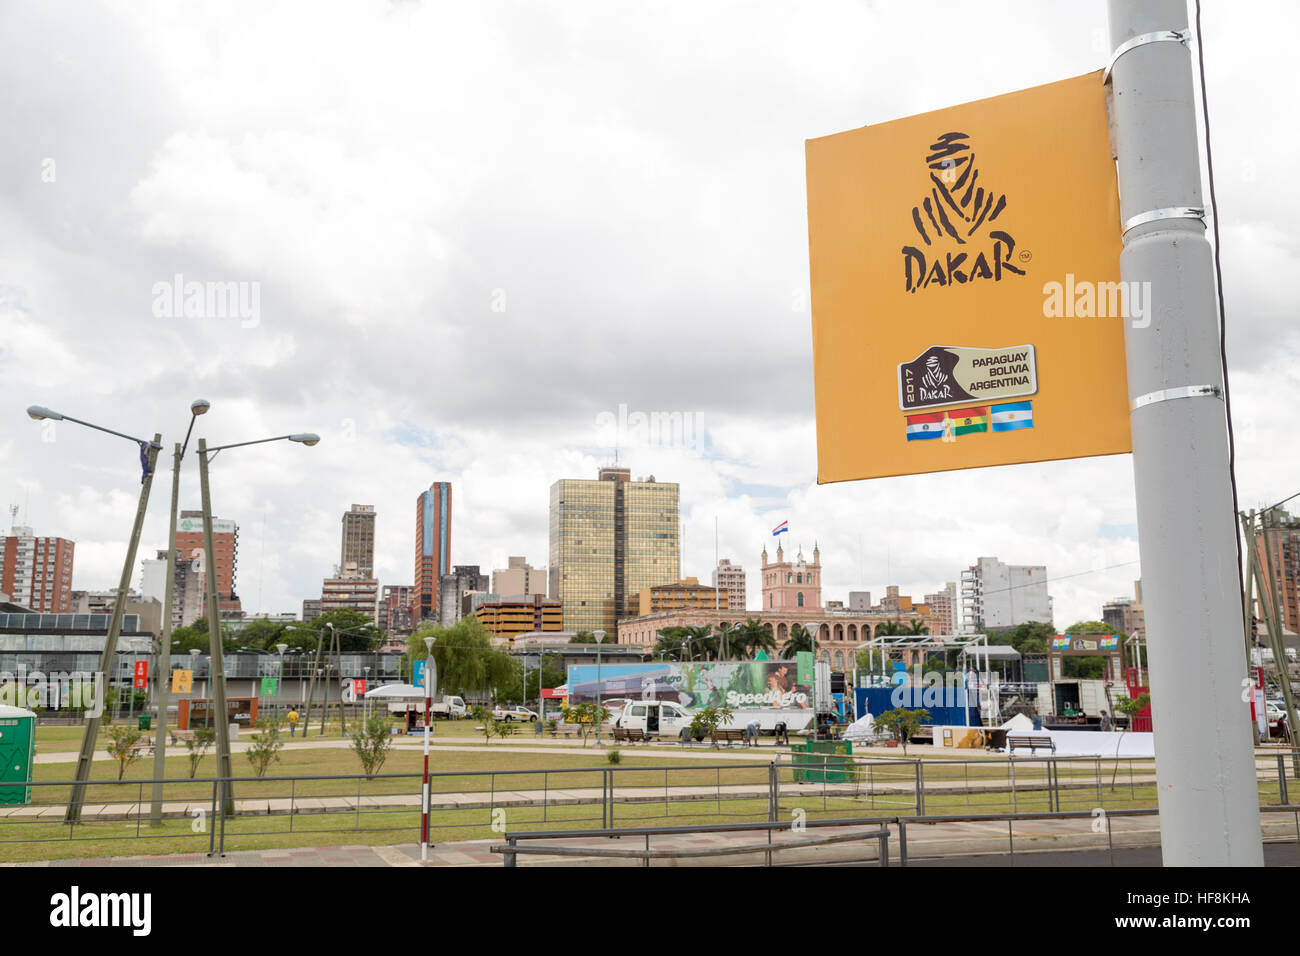 Asuncion, Paraguay. 29th December, 2016.  View of preparations for the 2017 Dakar Rally at Dakar Village in front of the Palacio de los Lopez (Lopez Presidential Palace) in Asuncion, Paraguay. Paraguay joining the ranks of host countries for the first time since the rally was relocated to South America in 2009. Together with Argentina and Bolivia, the event will be hosted by three nations in 2017. © Andre M. Chang/ARDUOPRESS/Alamy Live News Stock Photo